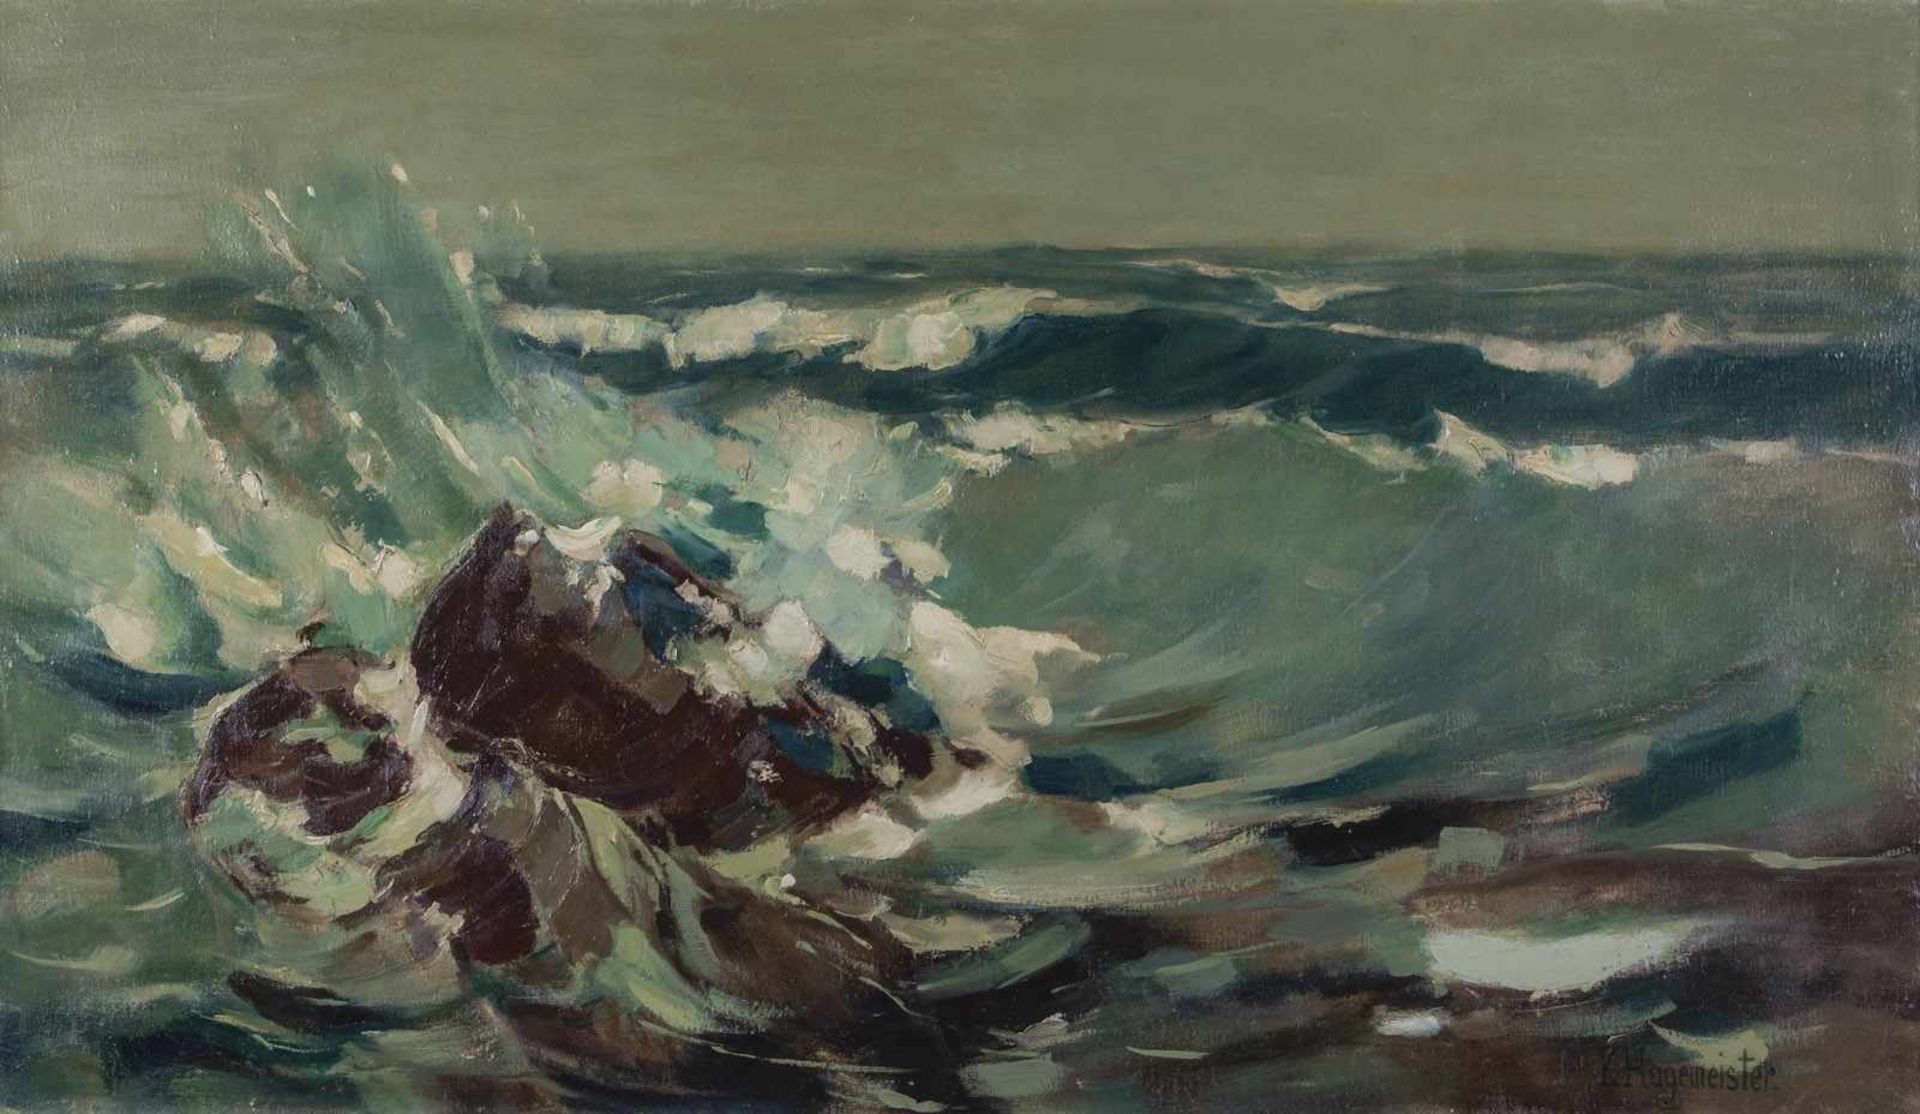 Karl Hagemeister. 1848 Werder - 1933 ibid. The wave. Oil on canvas. Signed lower right.60.5 x 104